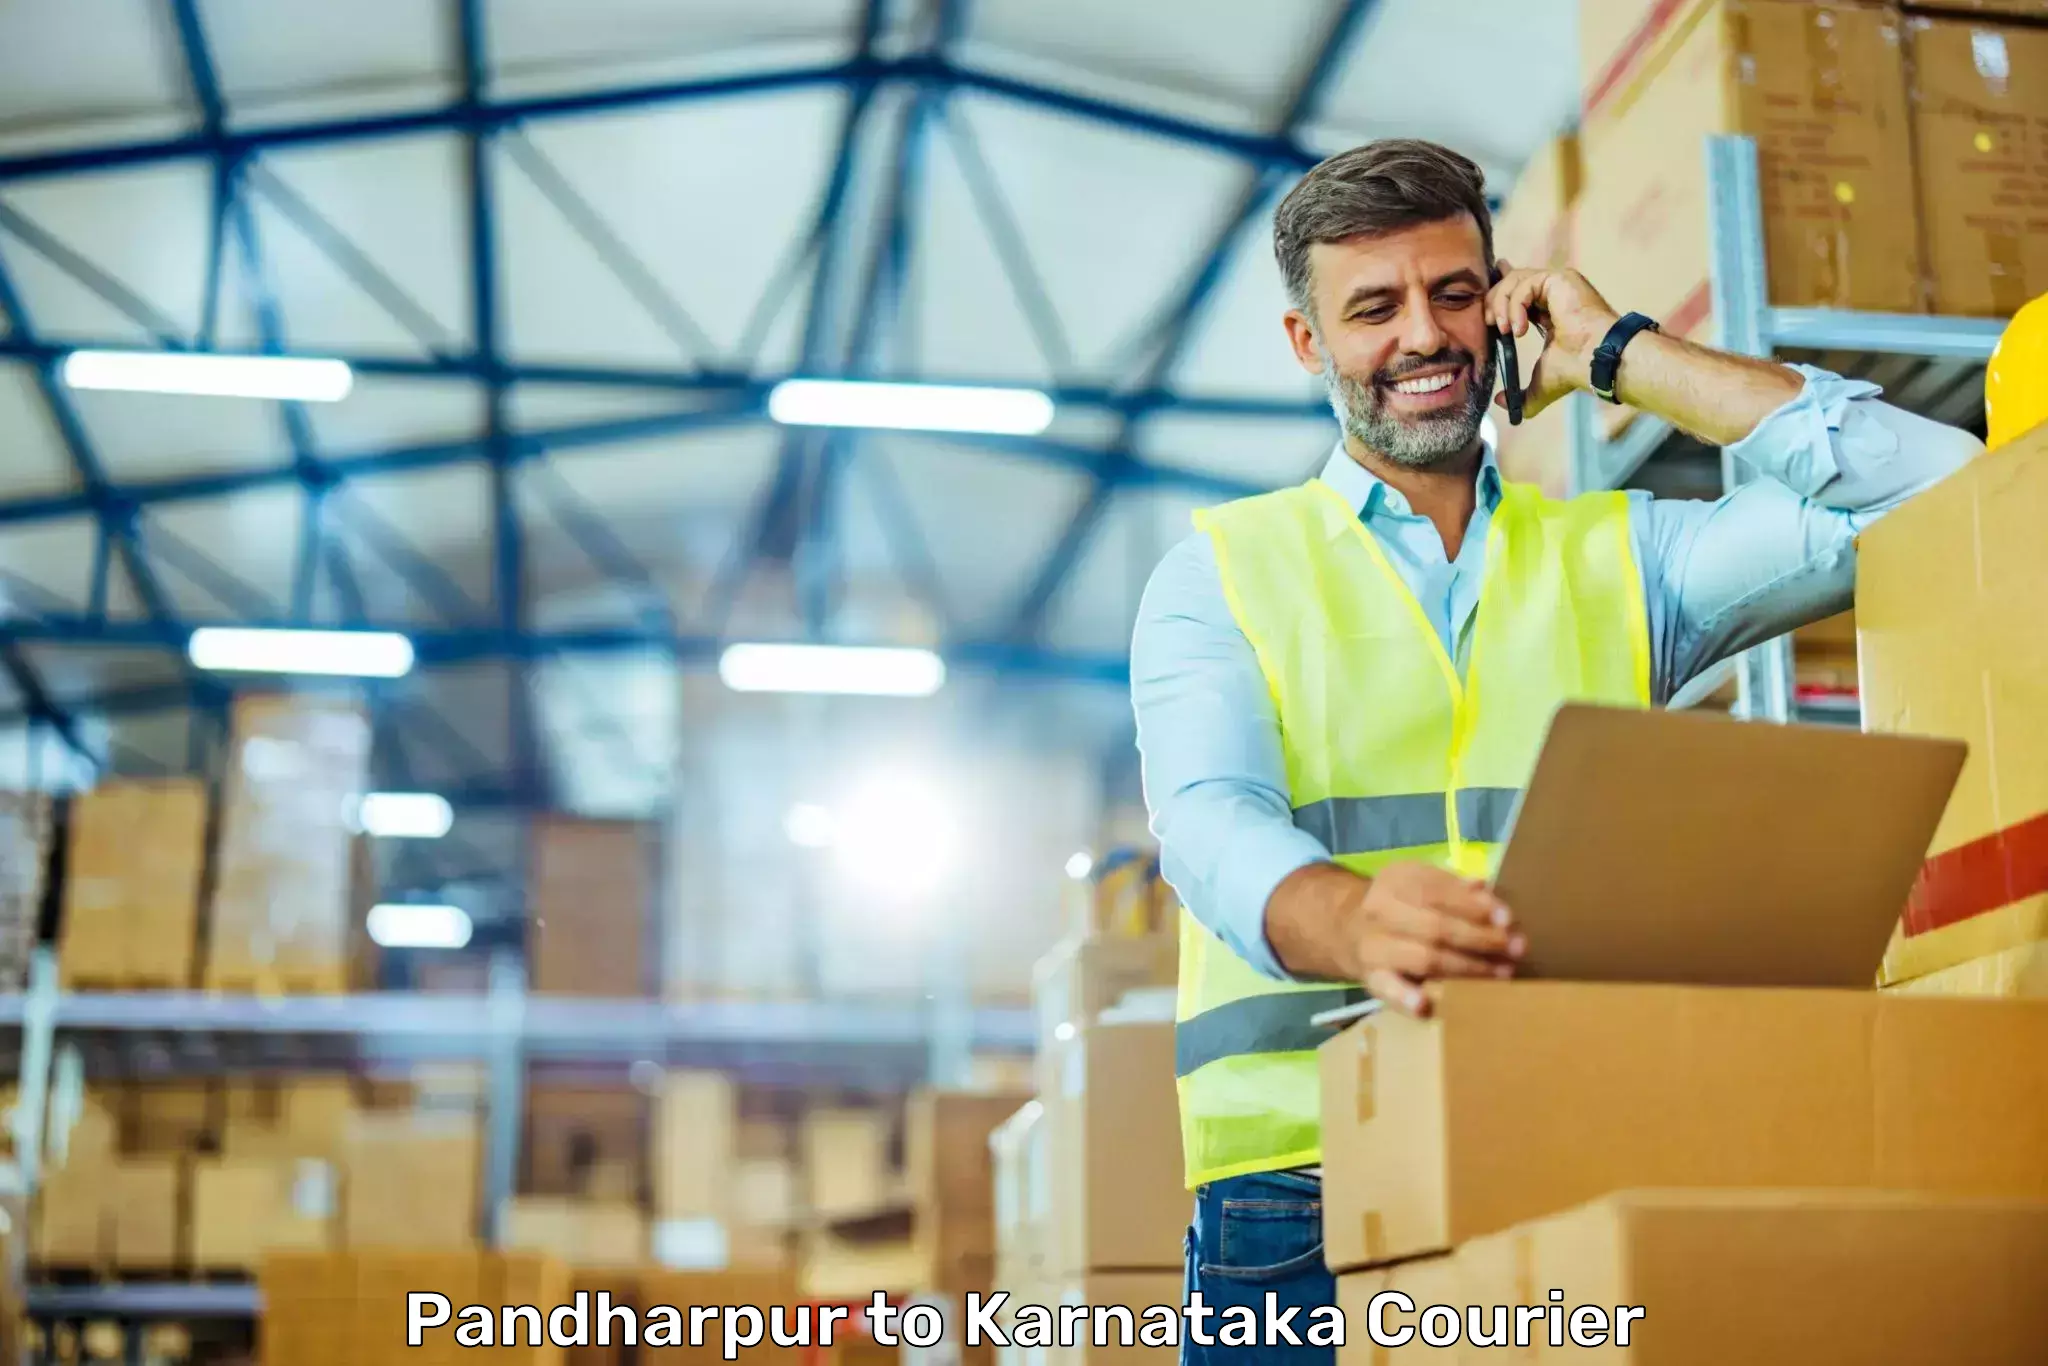 Global courier networks Pandharpur to Bagalkot